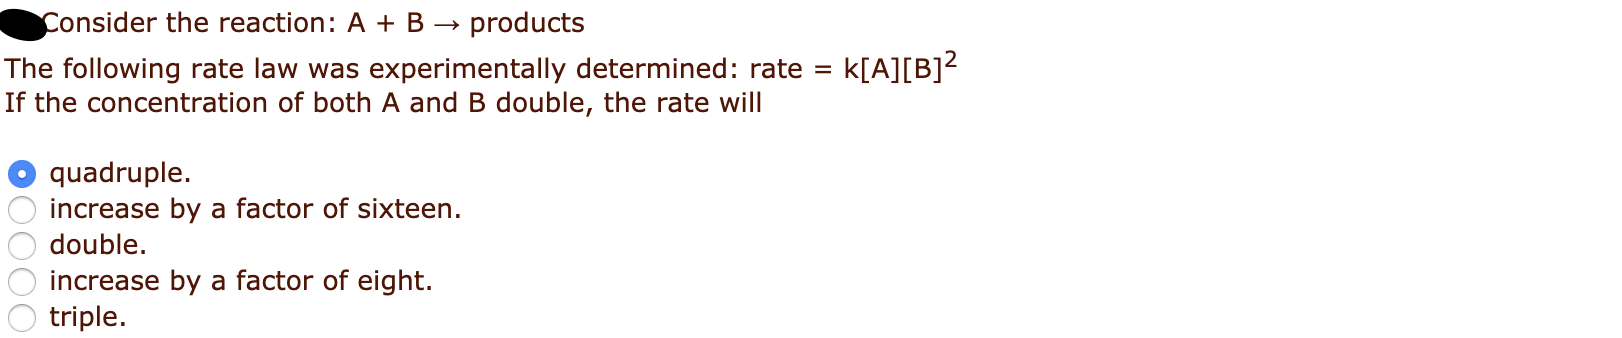 Consider the reaction: A + B →
The following rate law was experimentally determined: rate =
If the concentration of both A and B double, the rate will
products
k[A][B]?
quadruple.
increase by a factor of sixteen.
double.
increase by a factor of eight.
triple.
